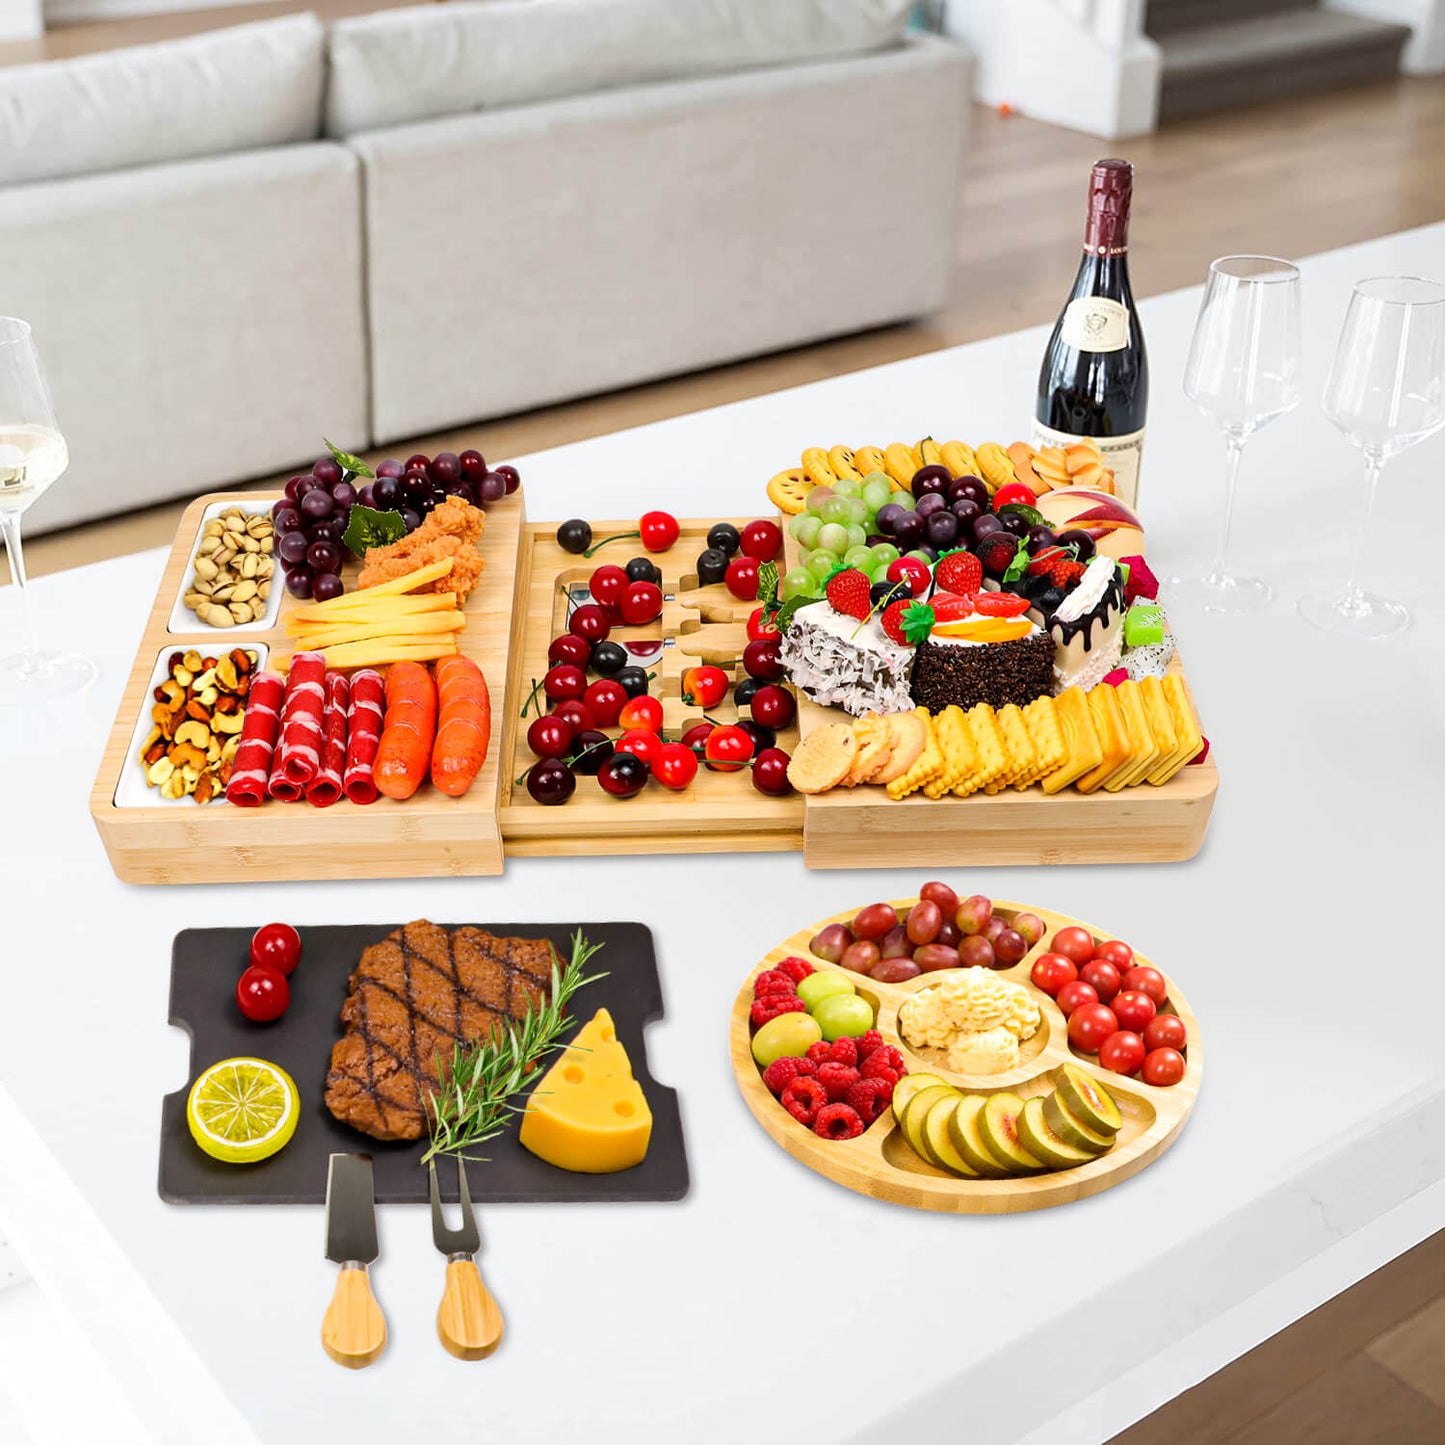 GL-Bamboo Slate Cheese Board Set, Including Fruit Tray